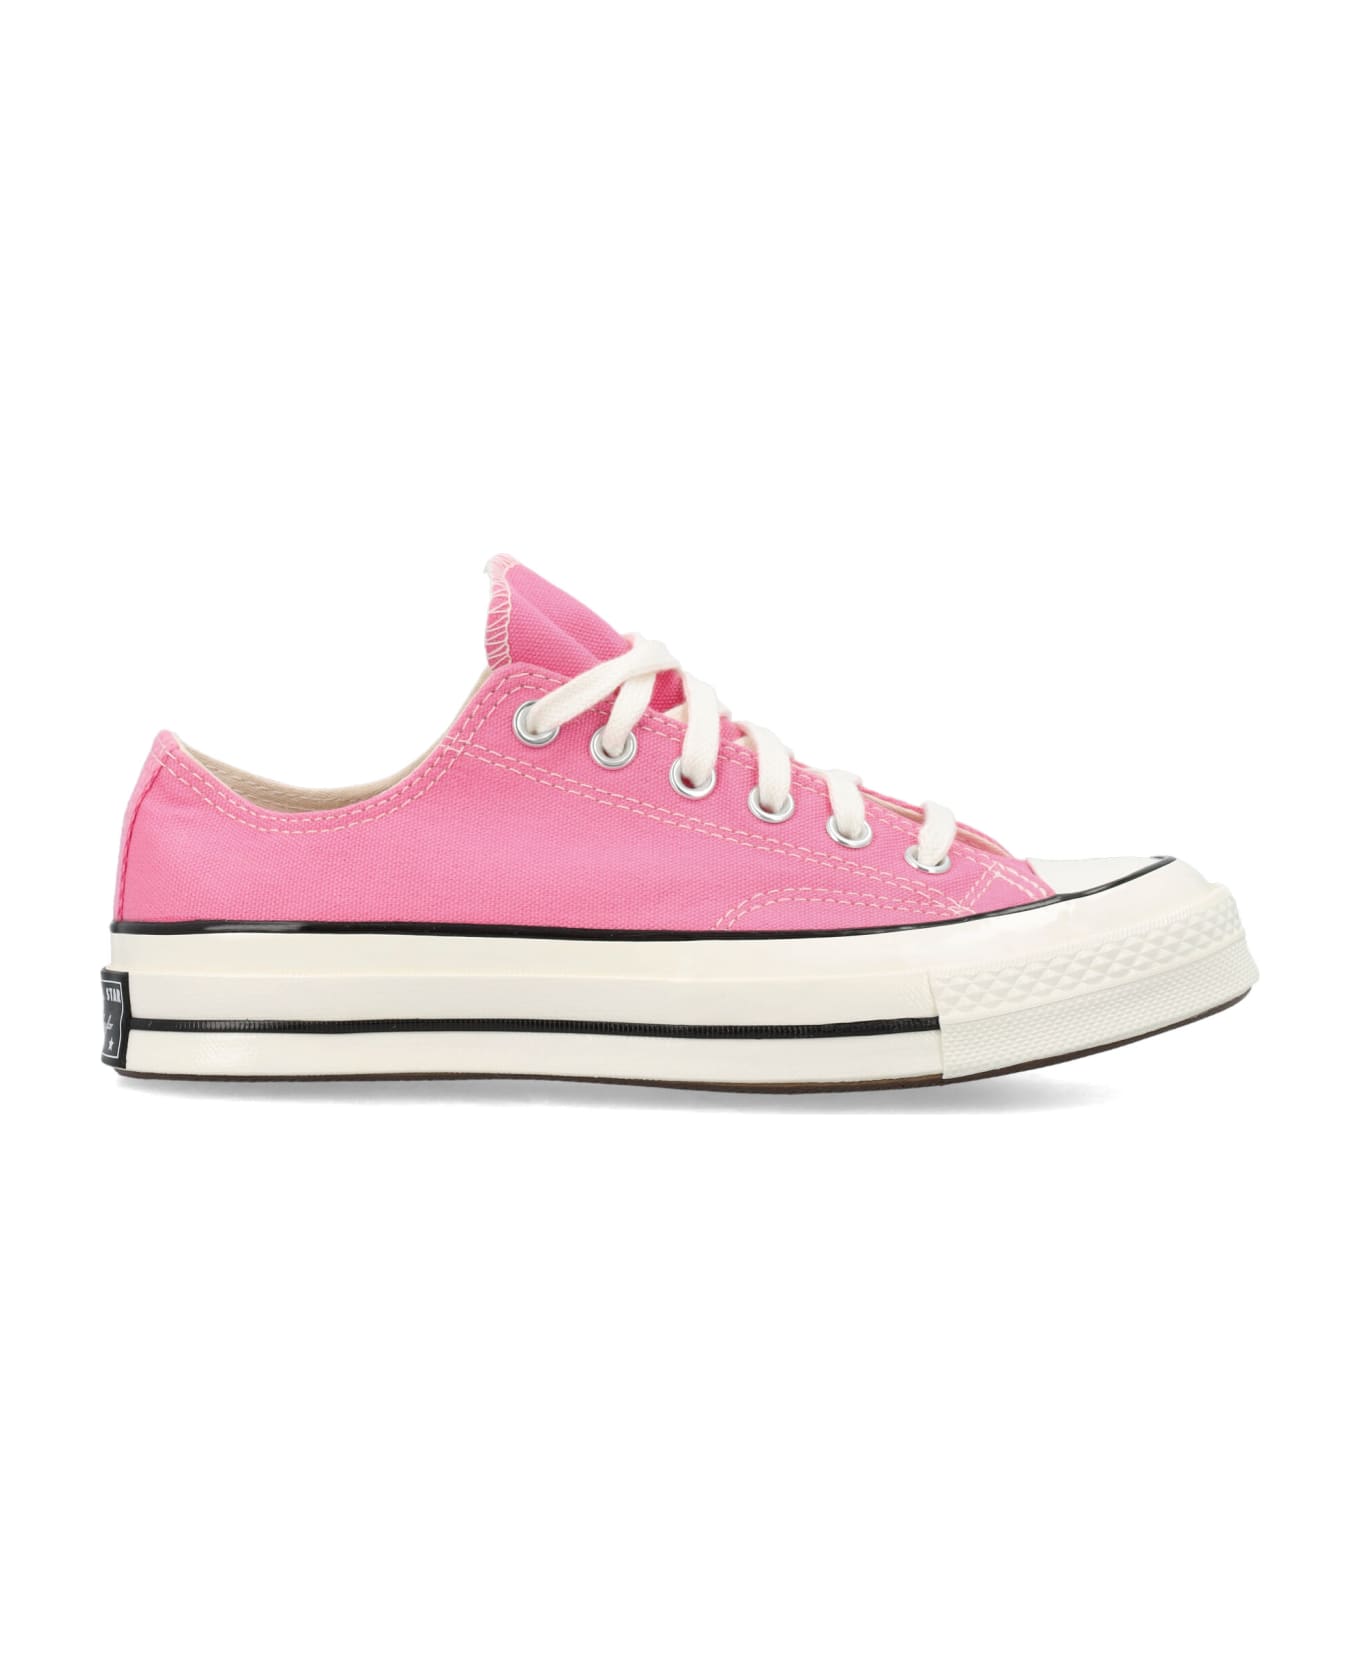 Converse Chuck 70 Sneakers - PINK